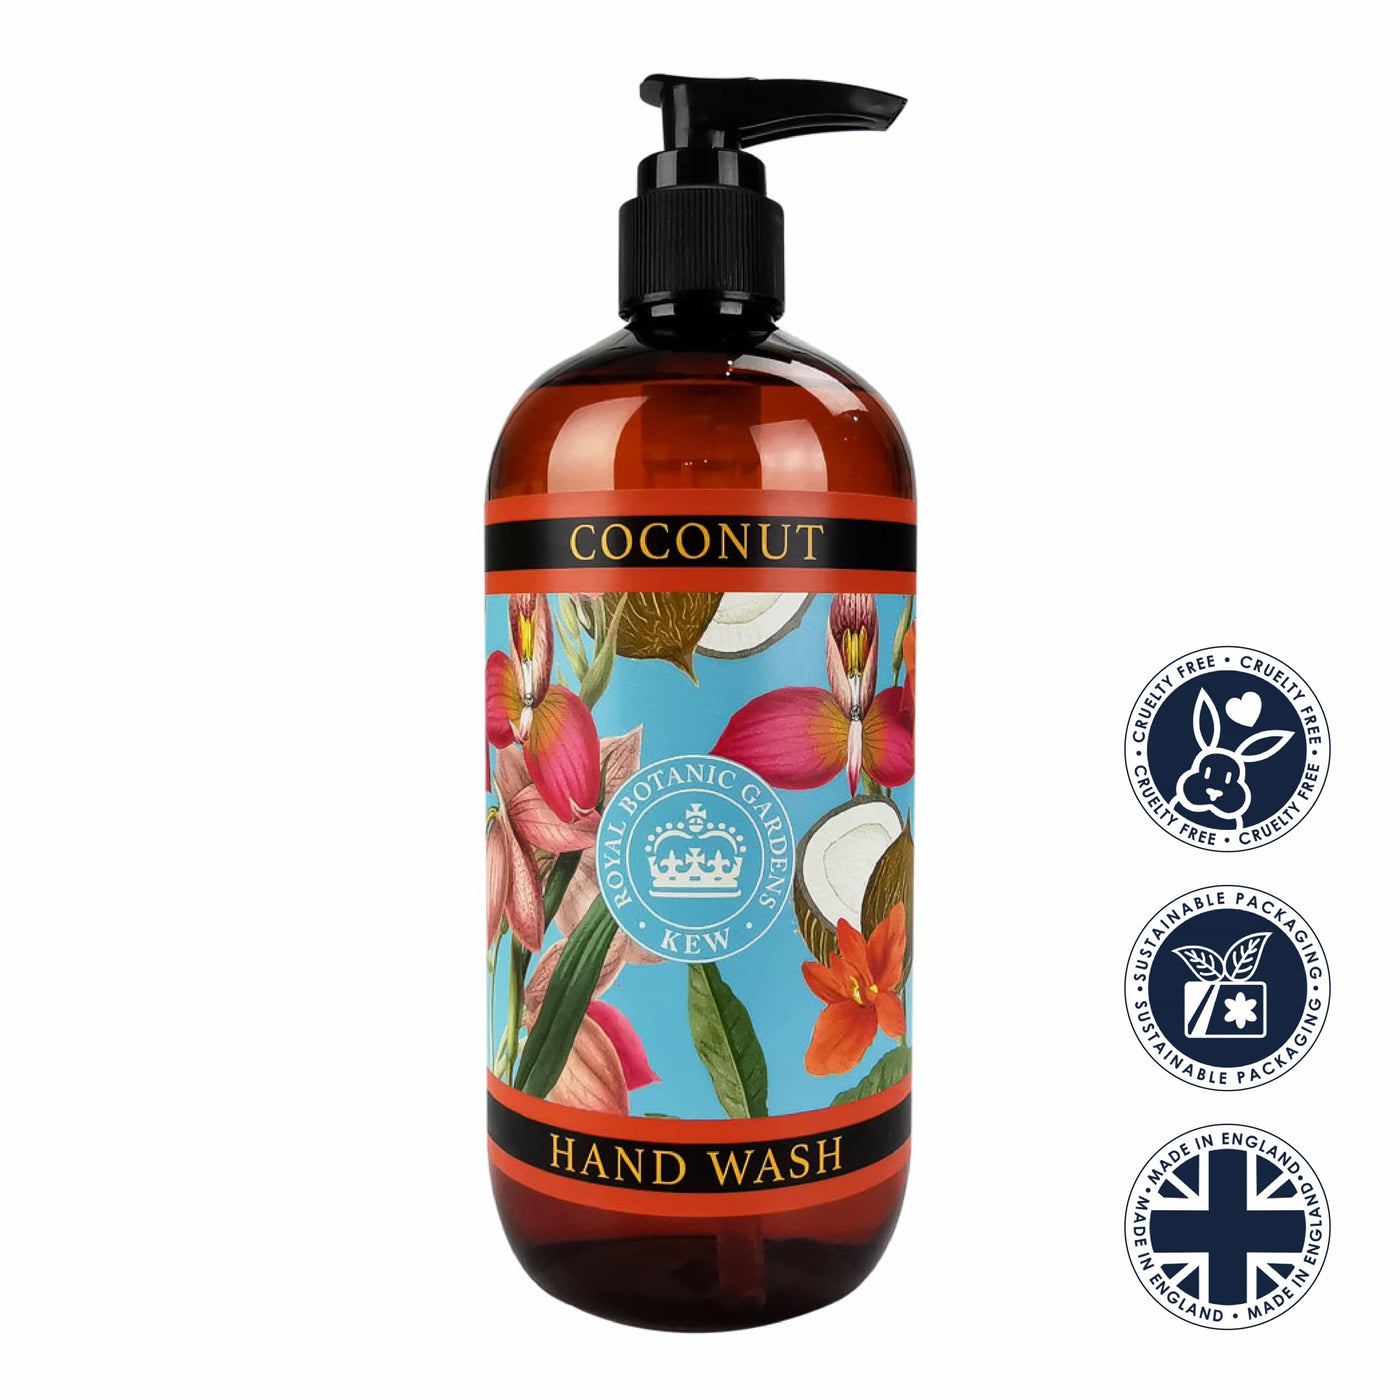 Coconut Hand Wash - Kew Gardens Collection from our Liquid Hand & Body Soap collection by The English Soap Company